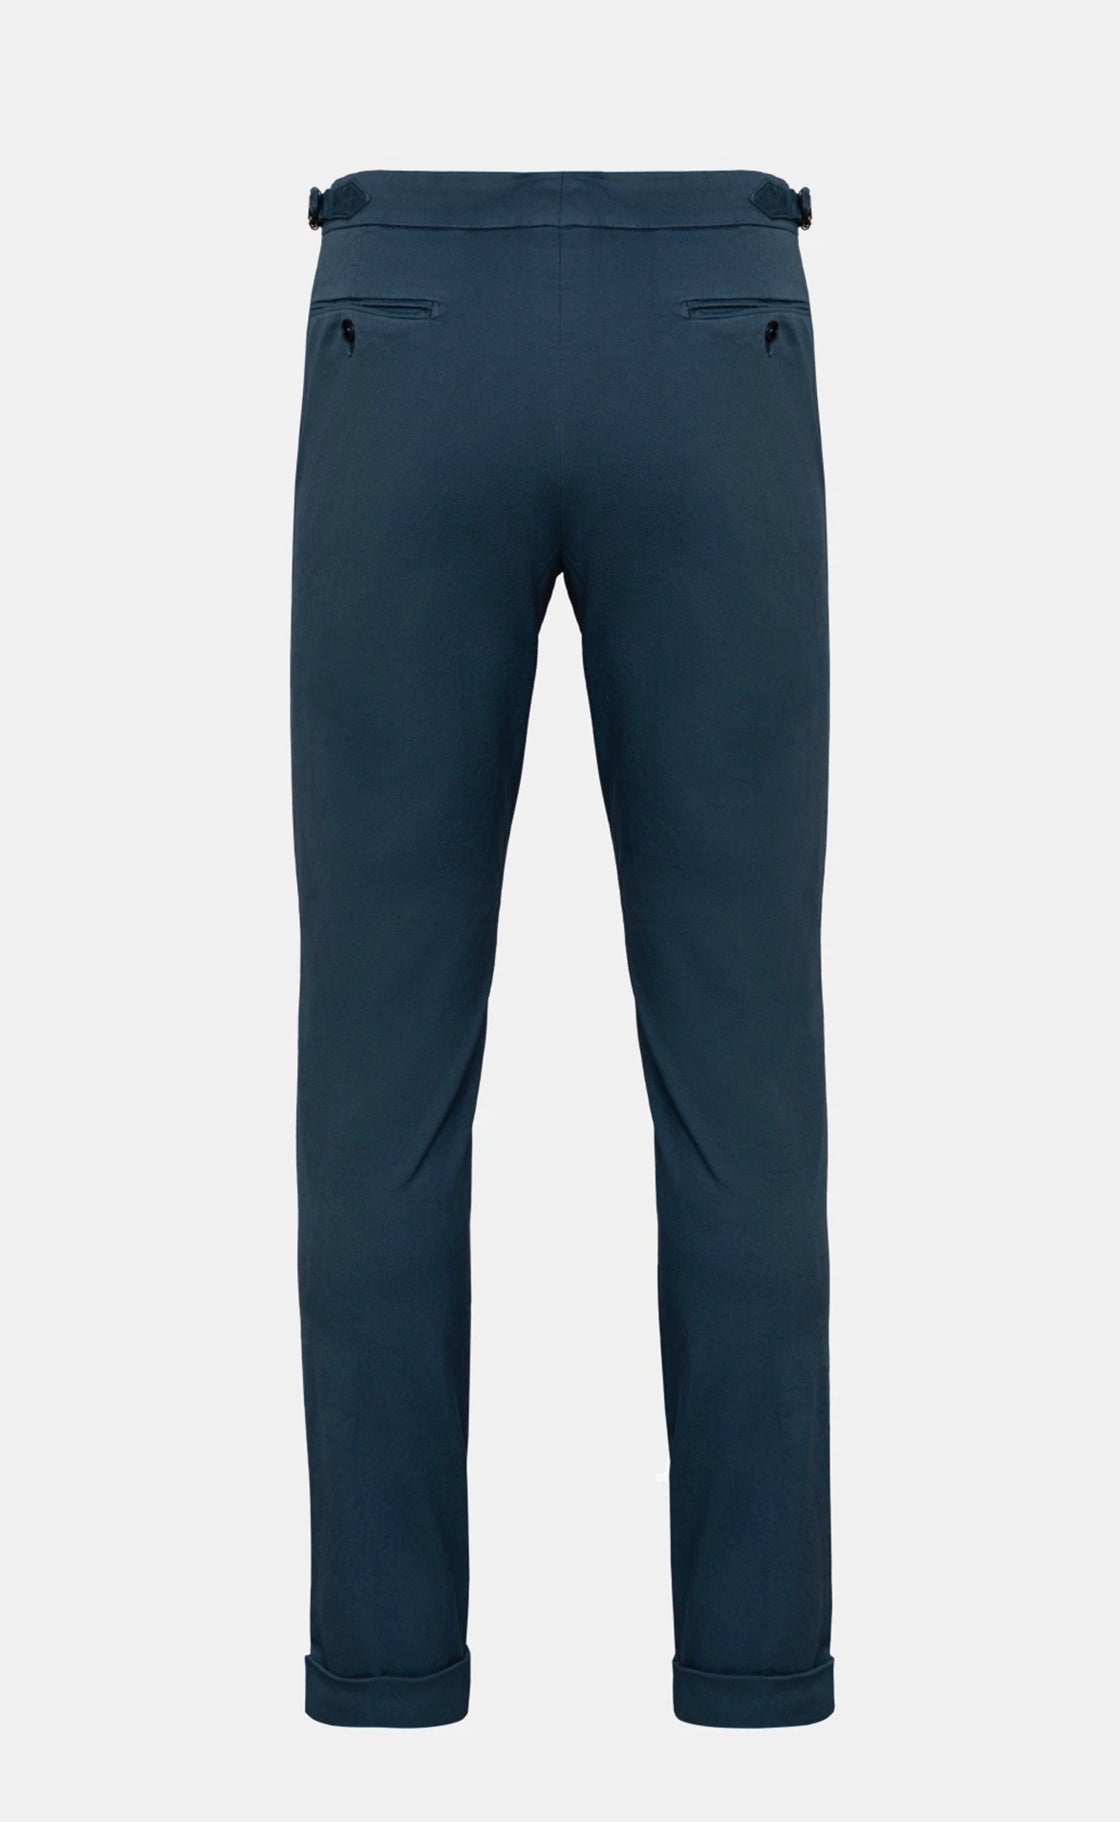 Blue CHINOS Trousers